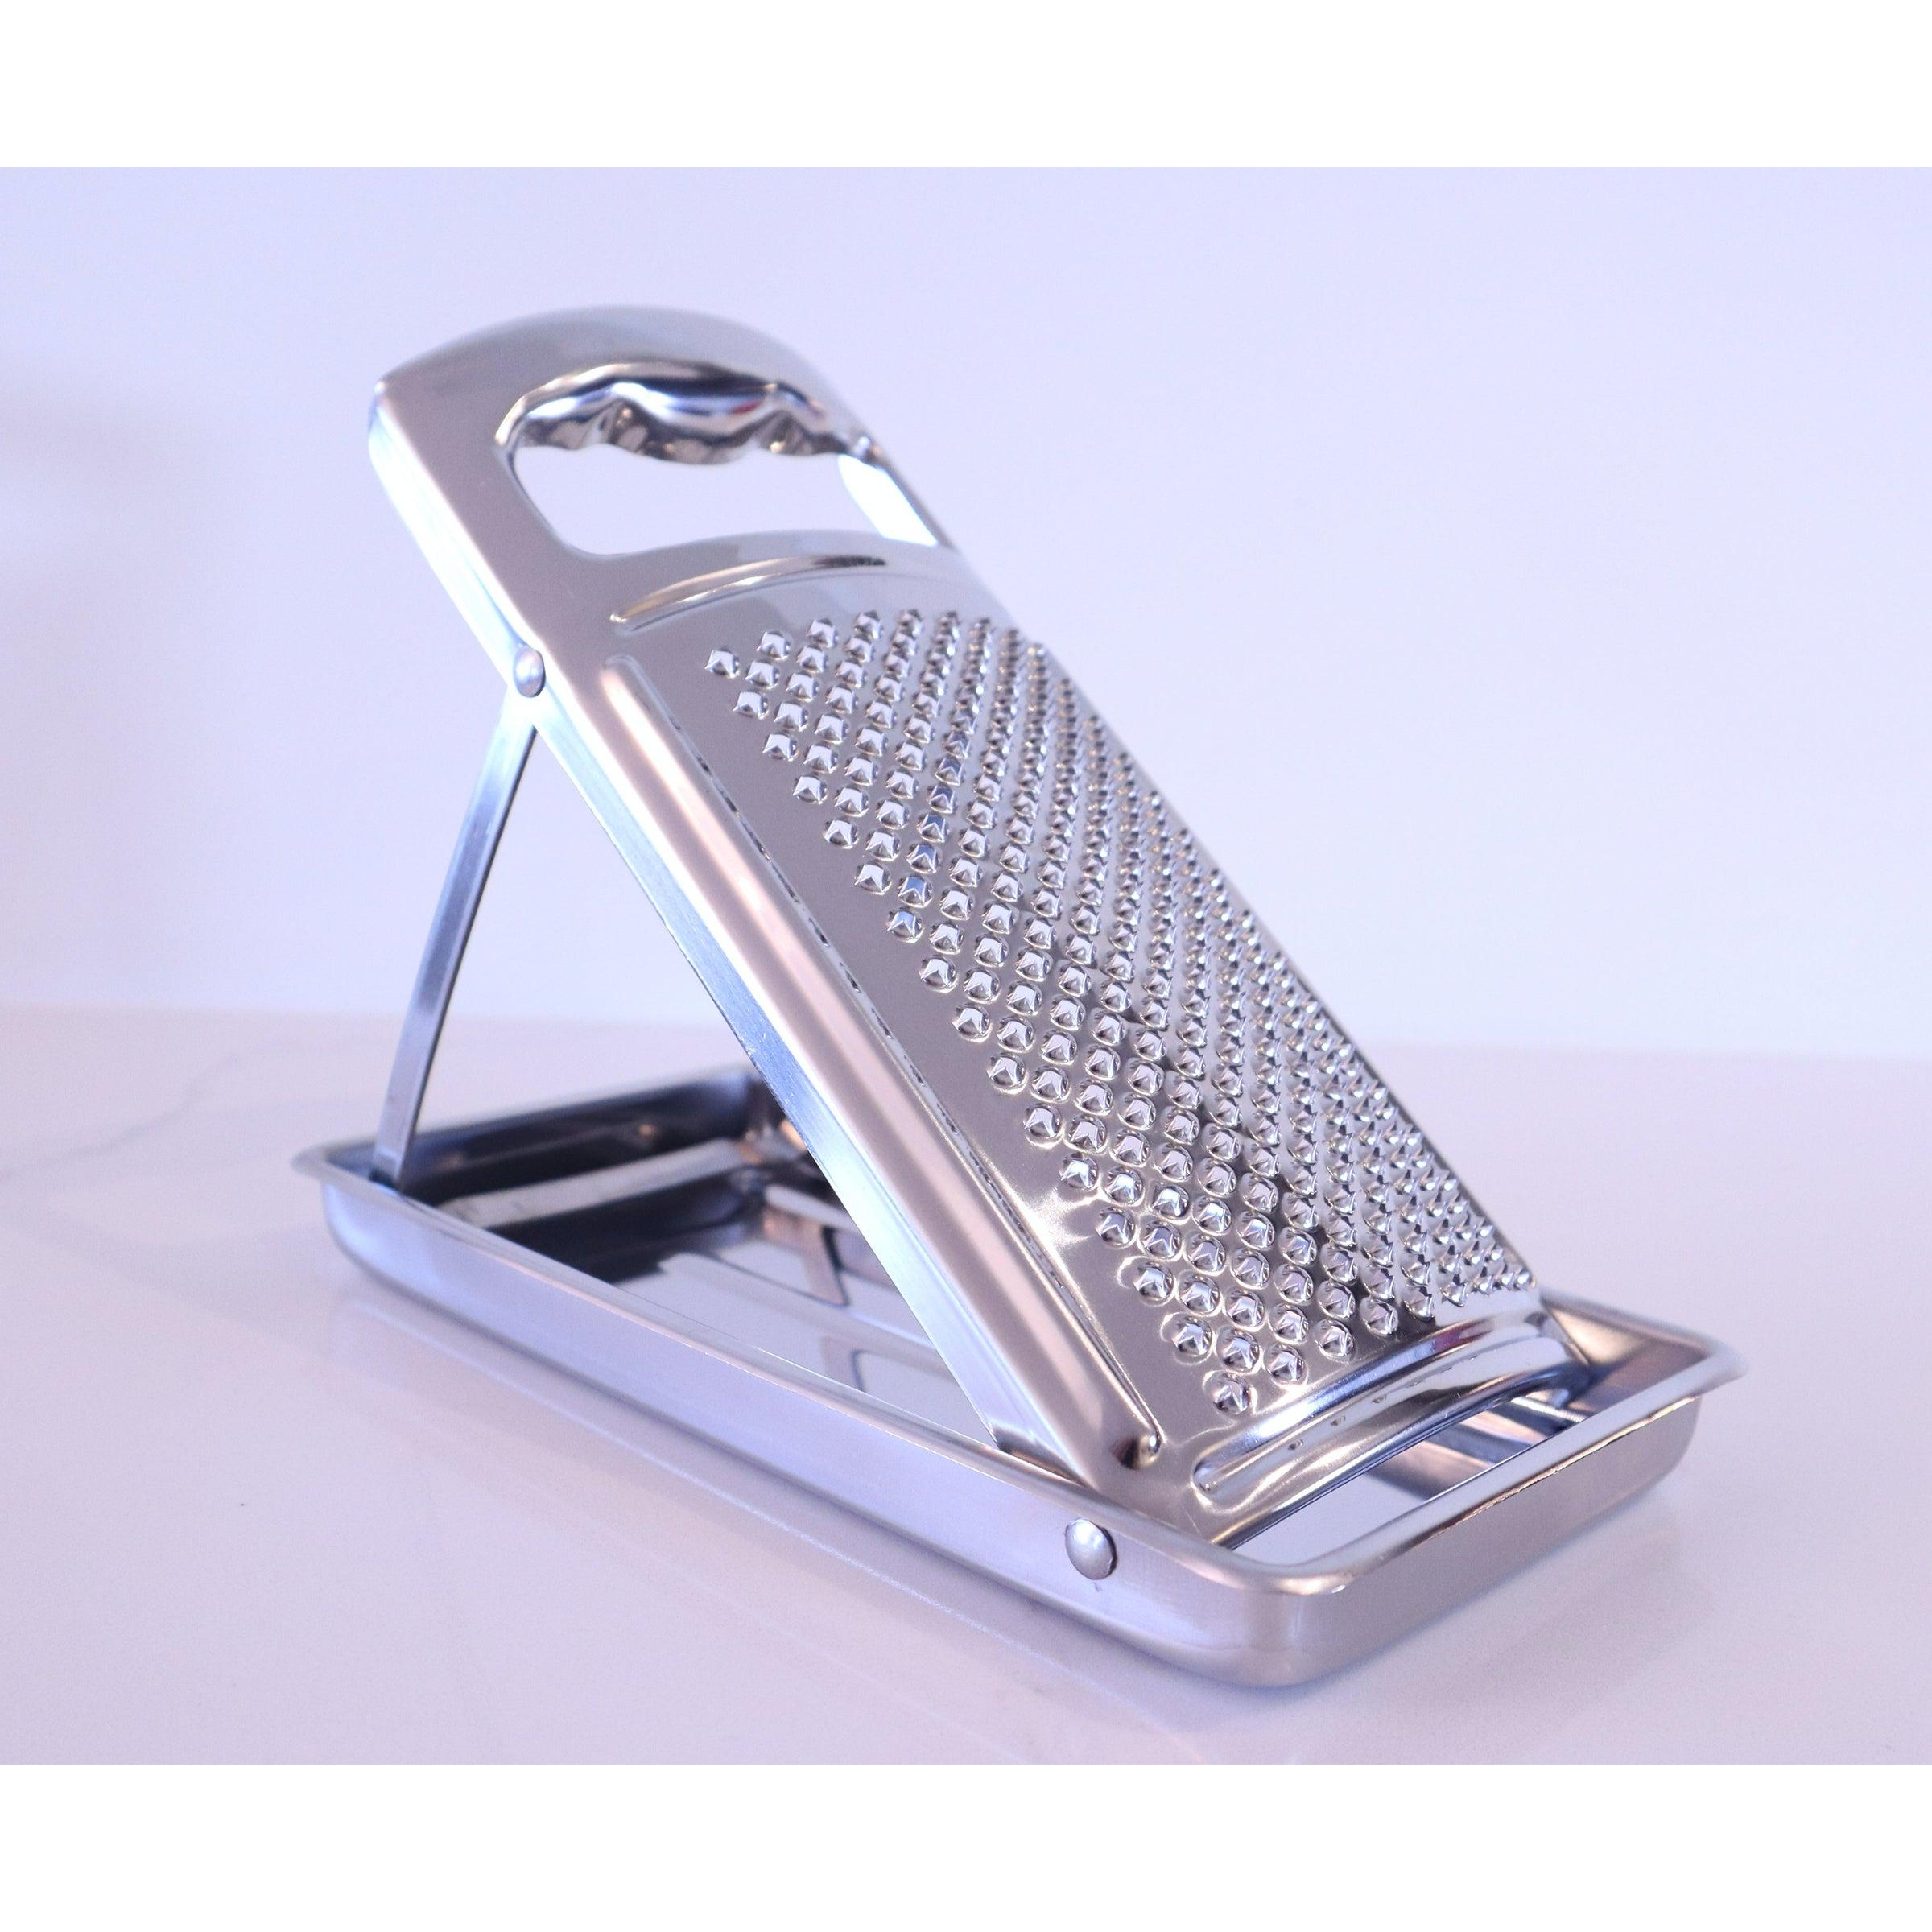 Eppicotispai Stainless Steel Cheese Grater with Case and Handle USA